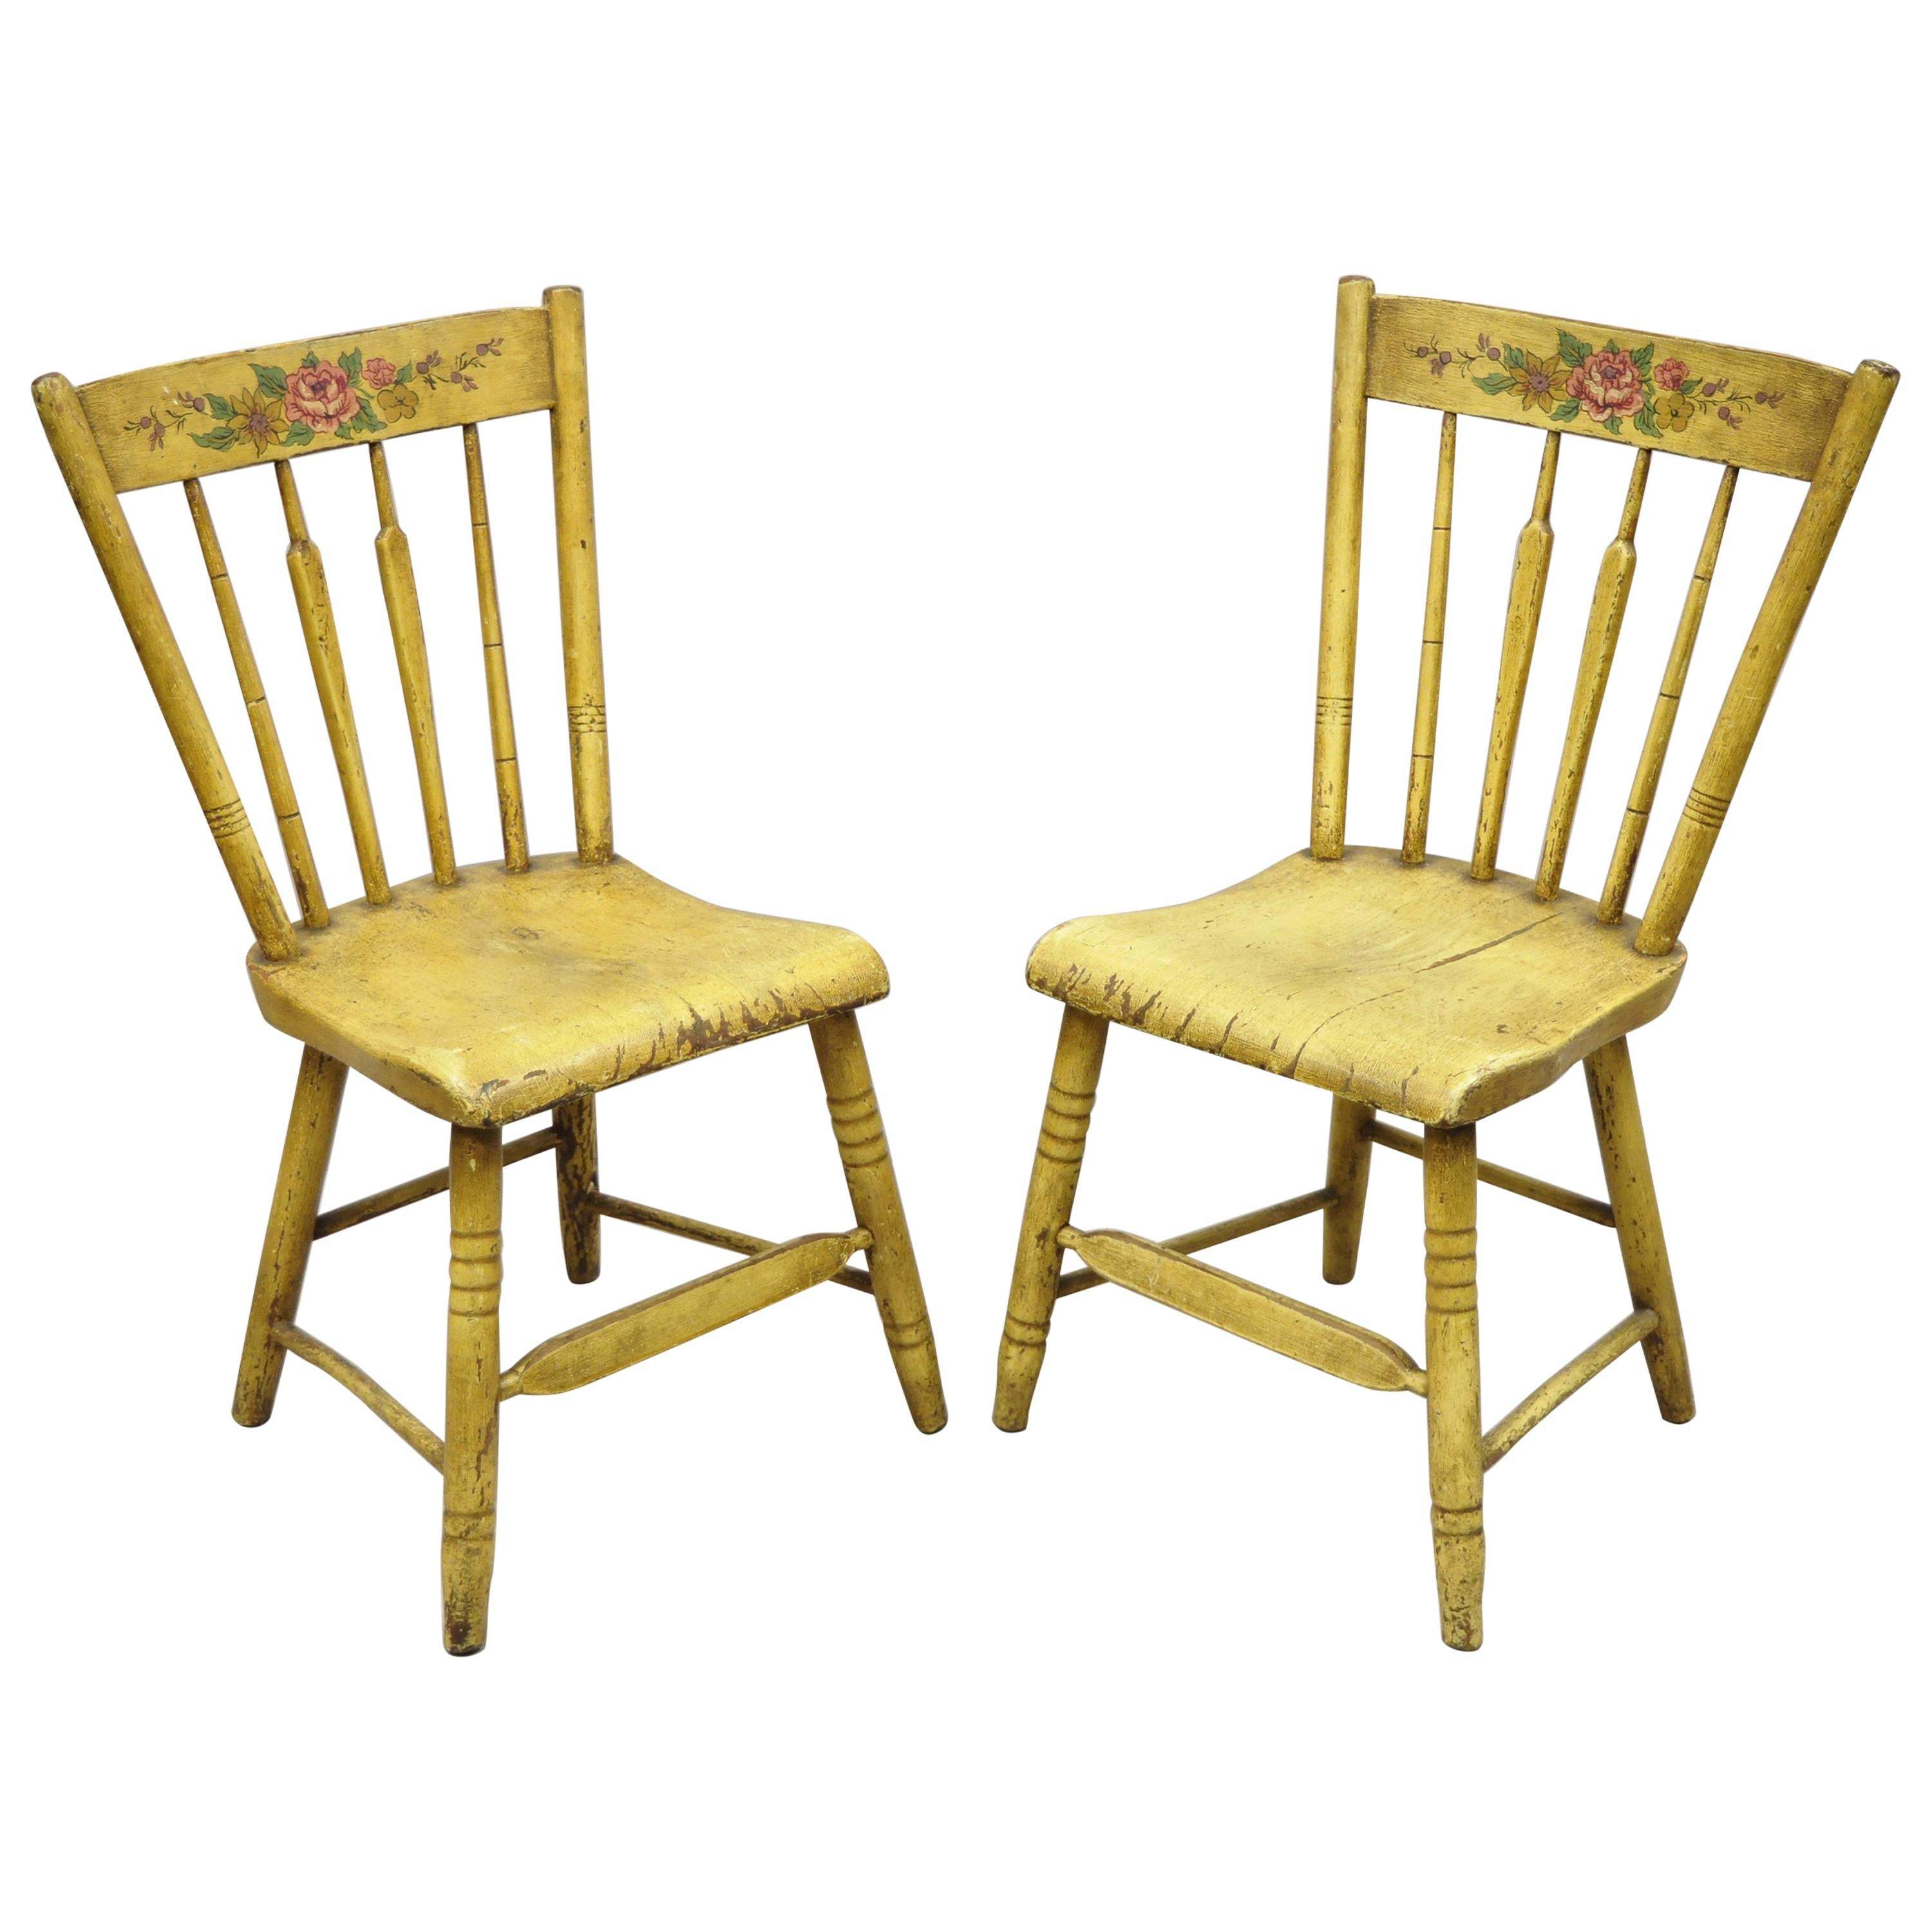 Frederick Loeser & Co Yellow Primitive Hitchcock Style Side Chairs, Pair 'B'